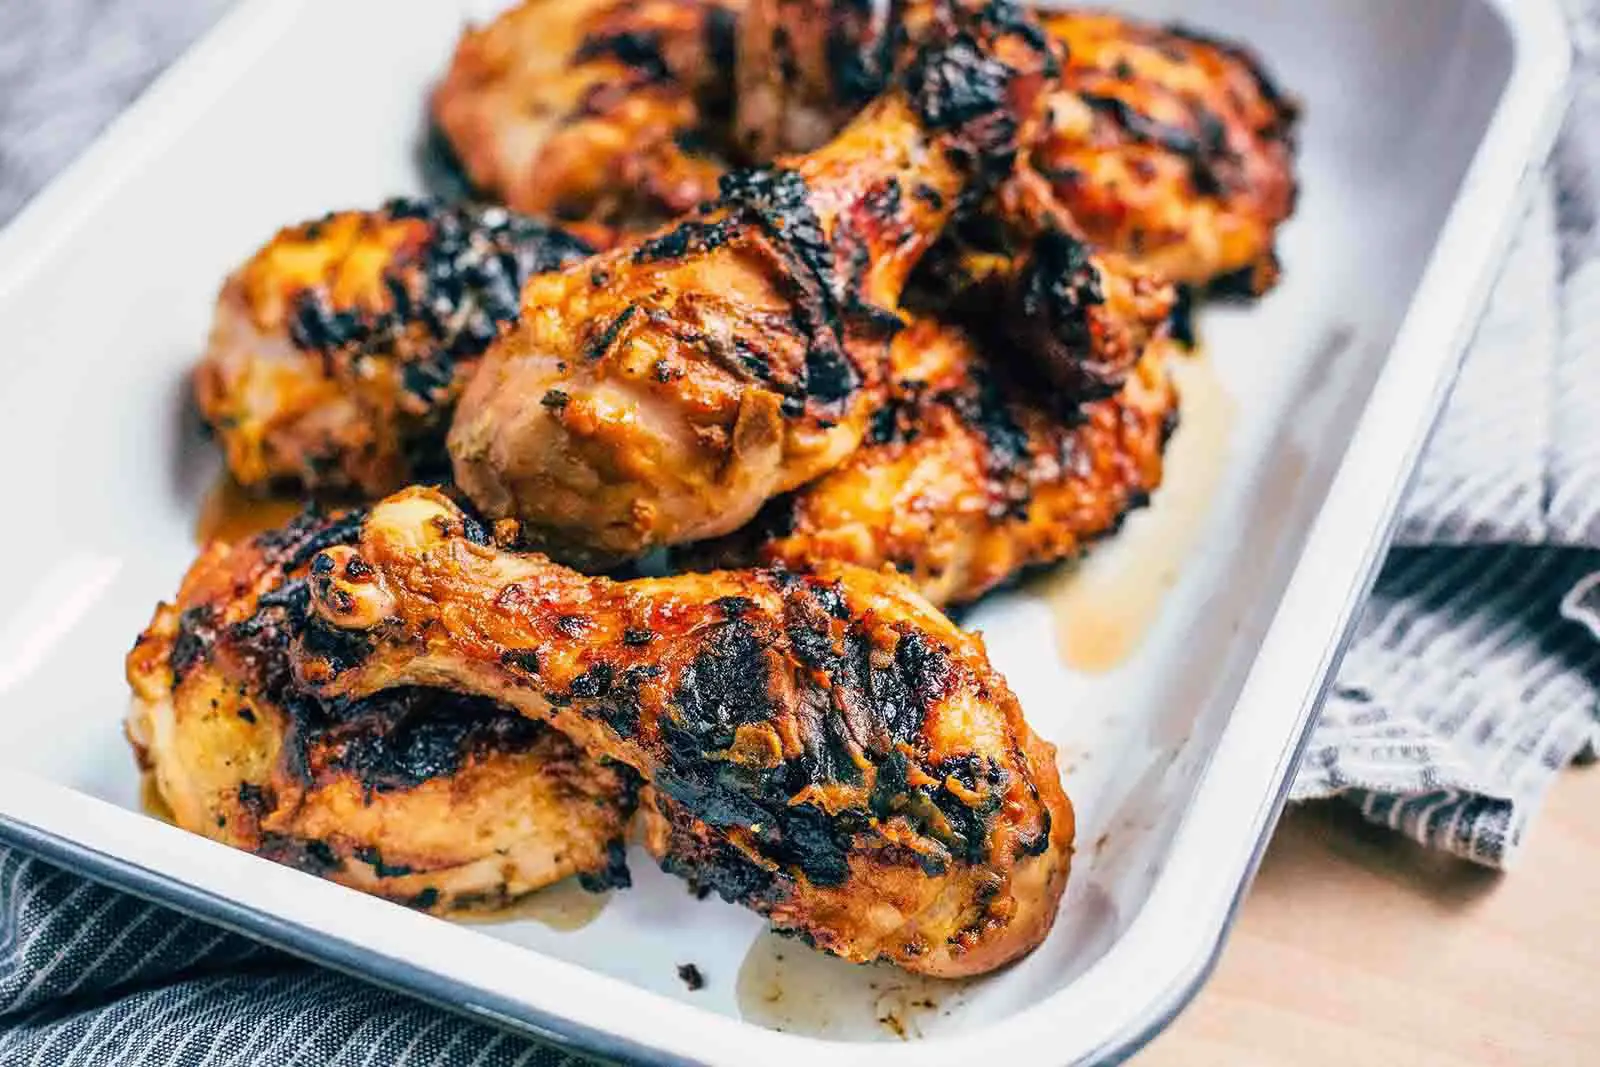 Grilled Chicken with South Carolina